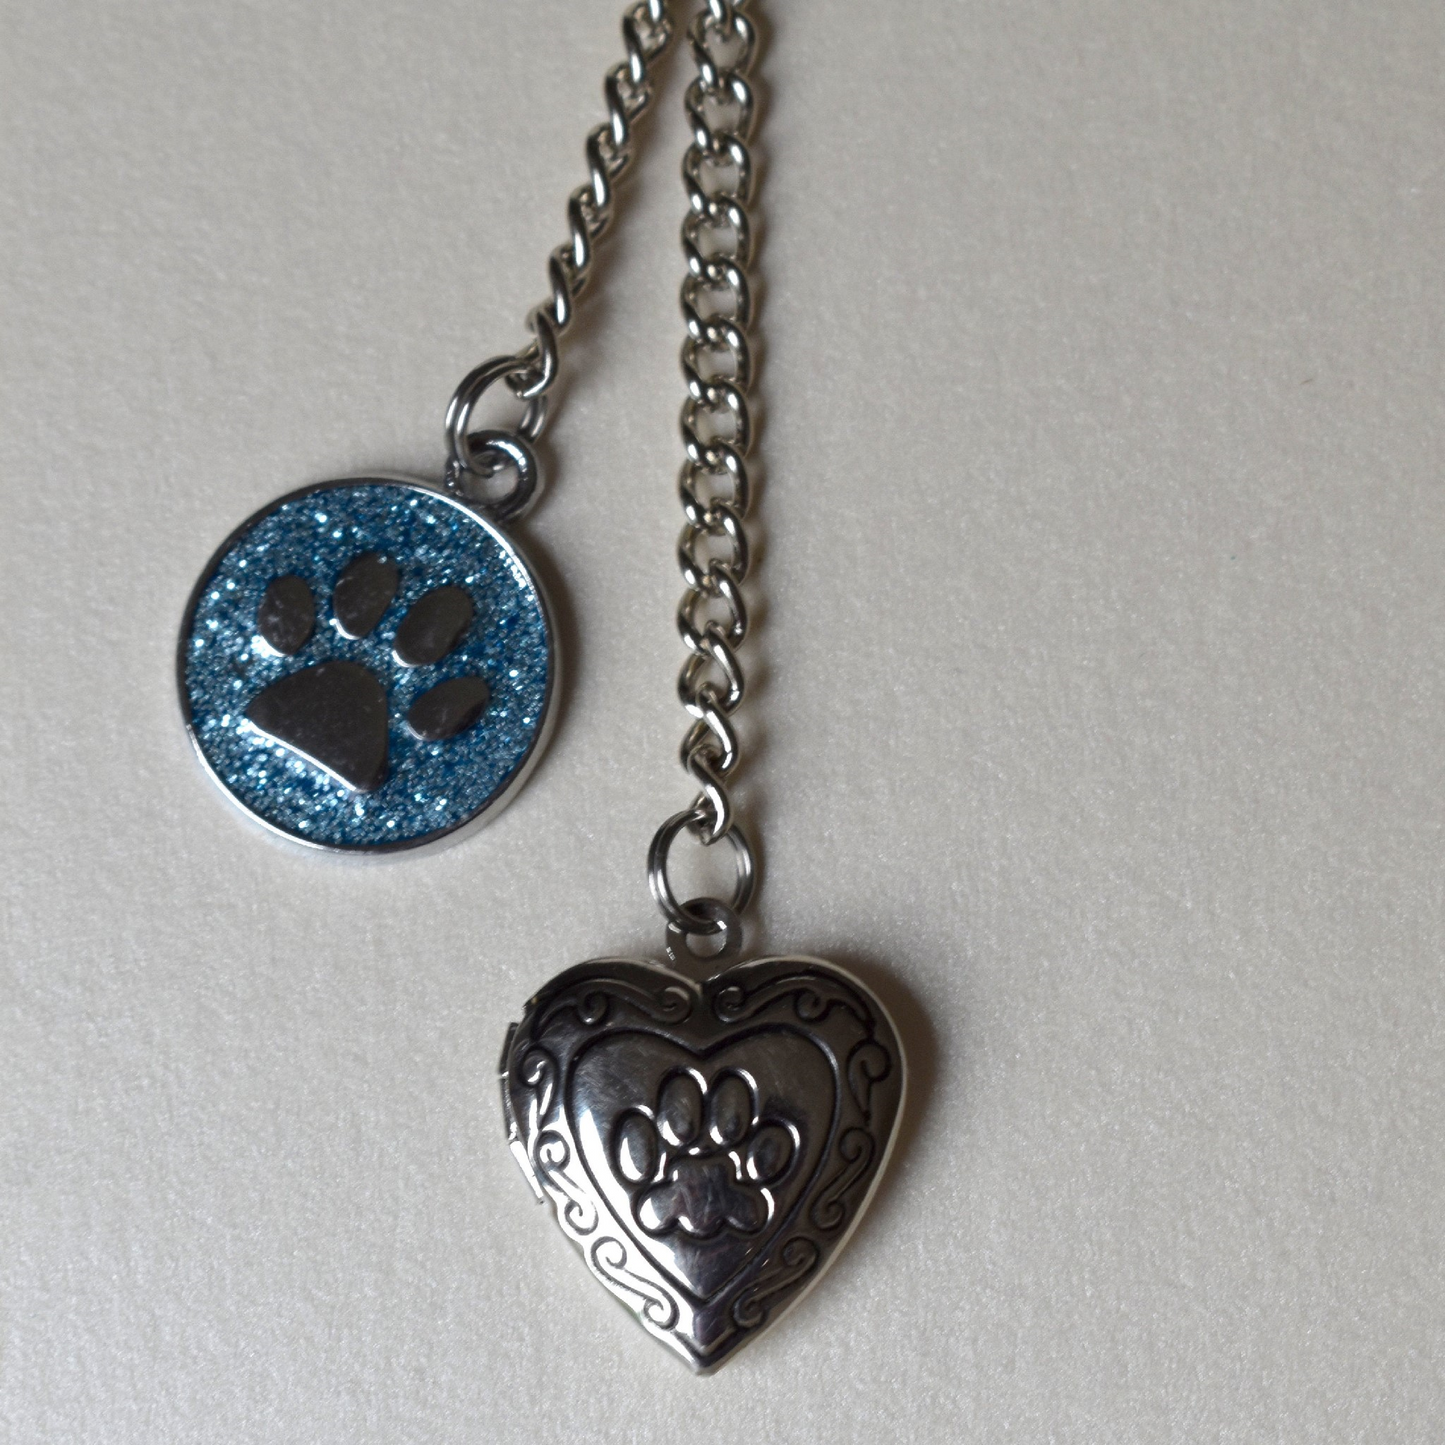 Heart shaped locket with paw print is teamed with a blue glitter charm, also with a paw print, part of  the pet memorial keyring